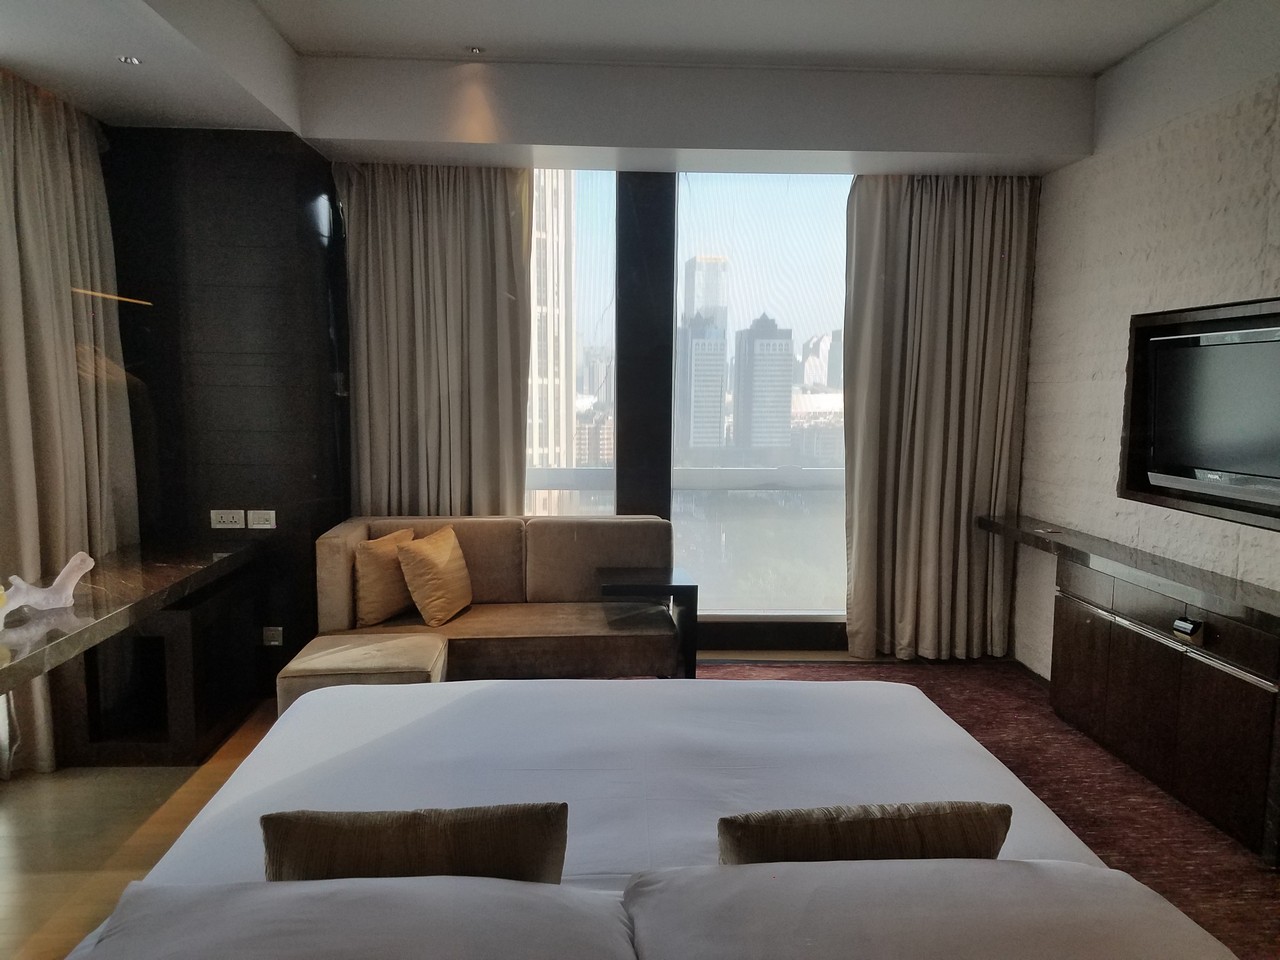 Welcome to the Grand Hyatt Guangzhou, an impressive hotel with great customer service, a beautiful room, and an overwhelming breakfast. But for my stay at the Park Hyatt Guangzhou, I would recommend making this your home when you visit Guangzhou.